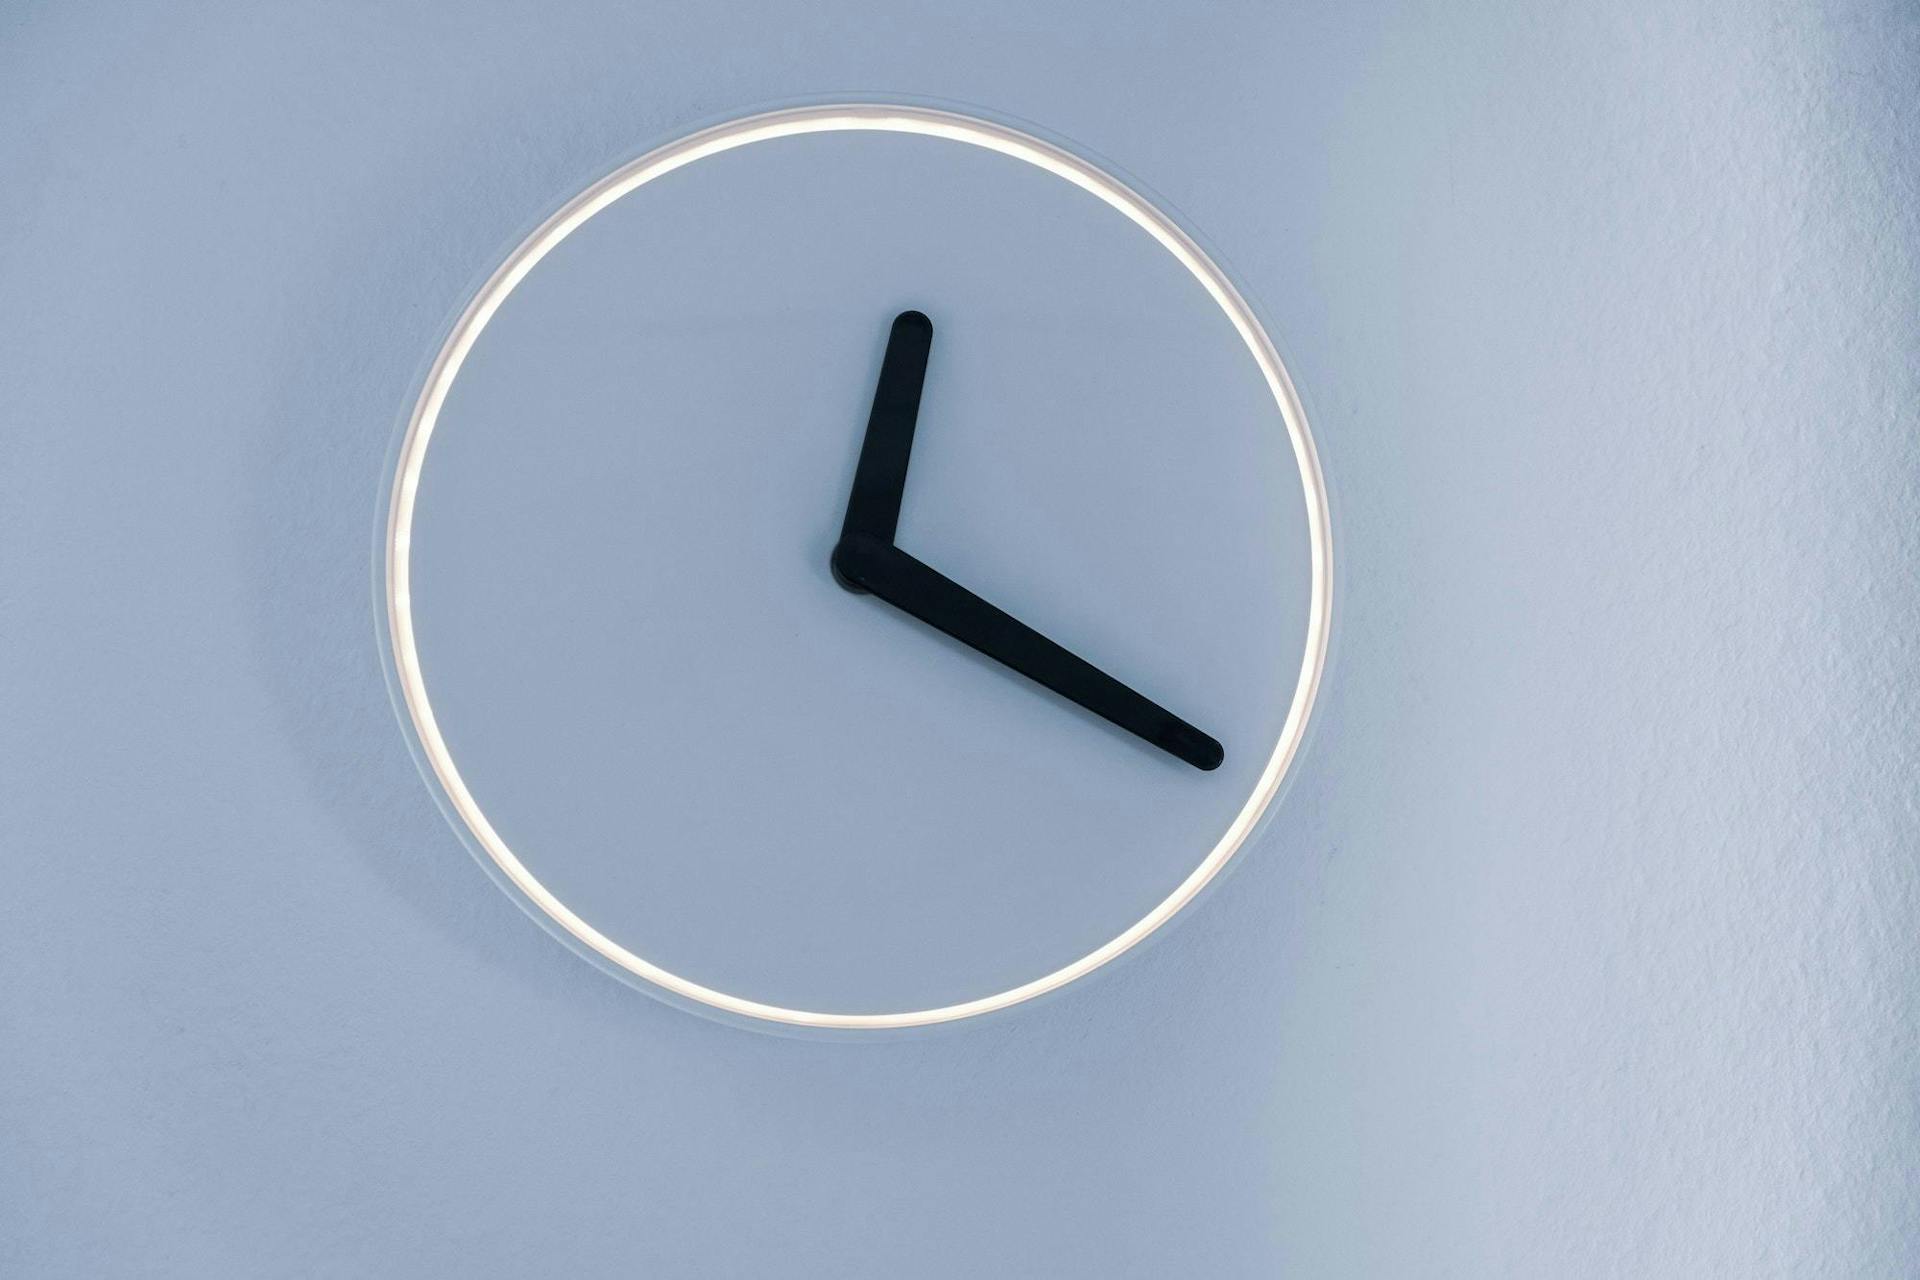 Image of a minimalistic clock with hands indicating the time 1:20.